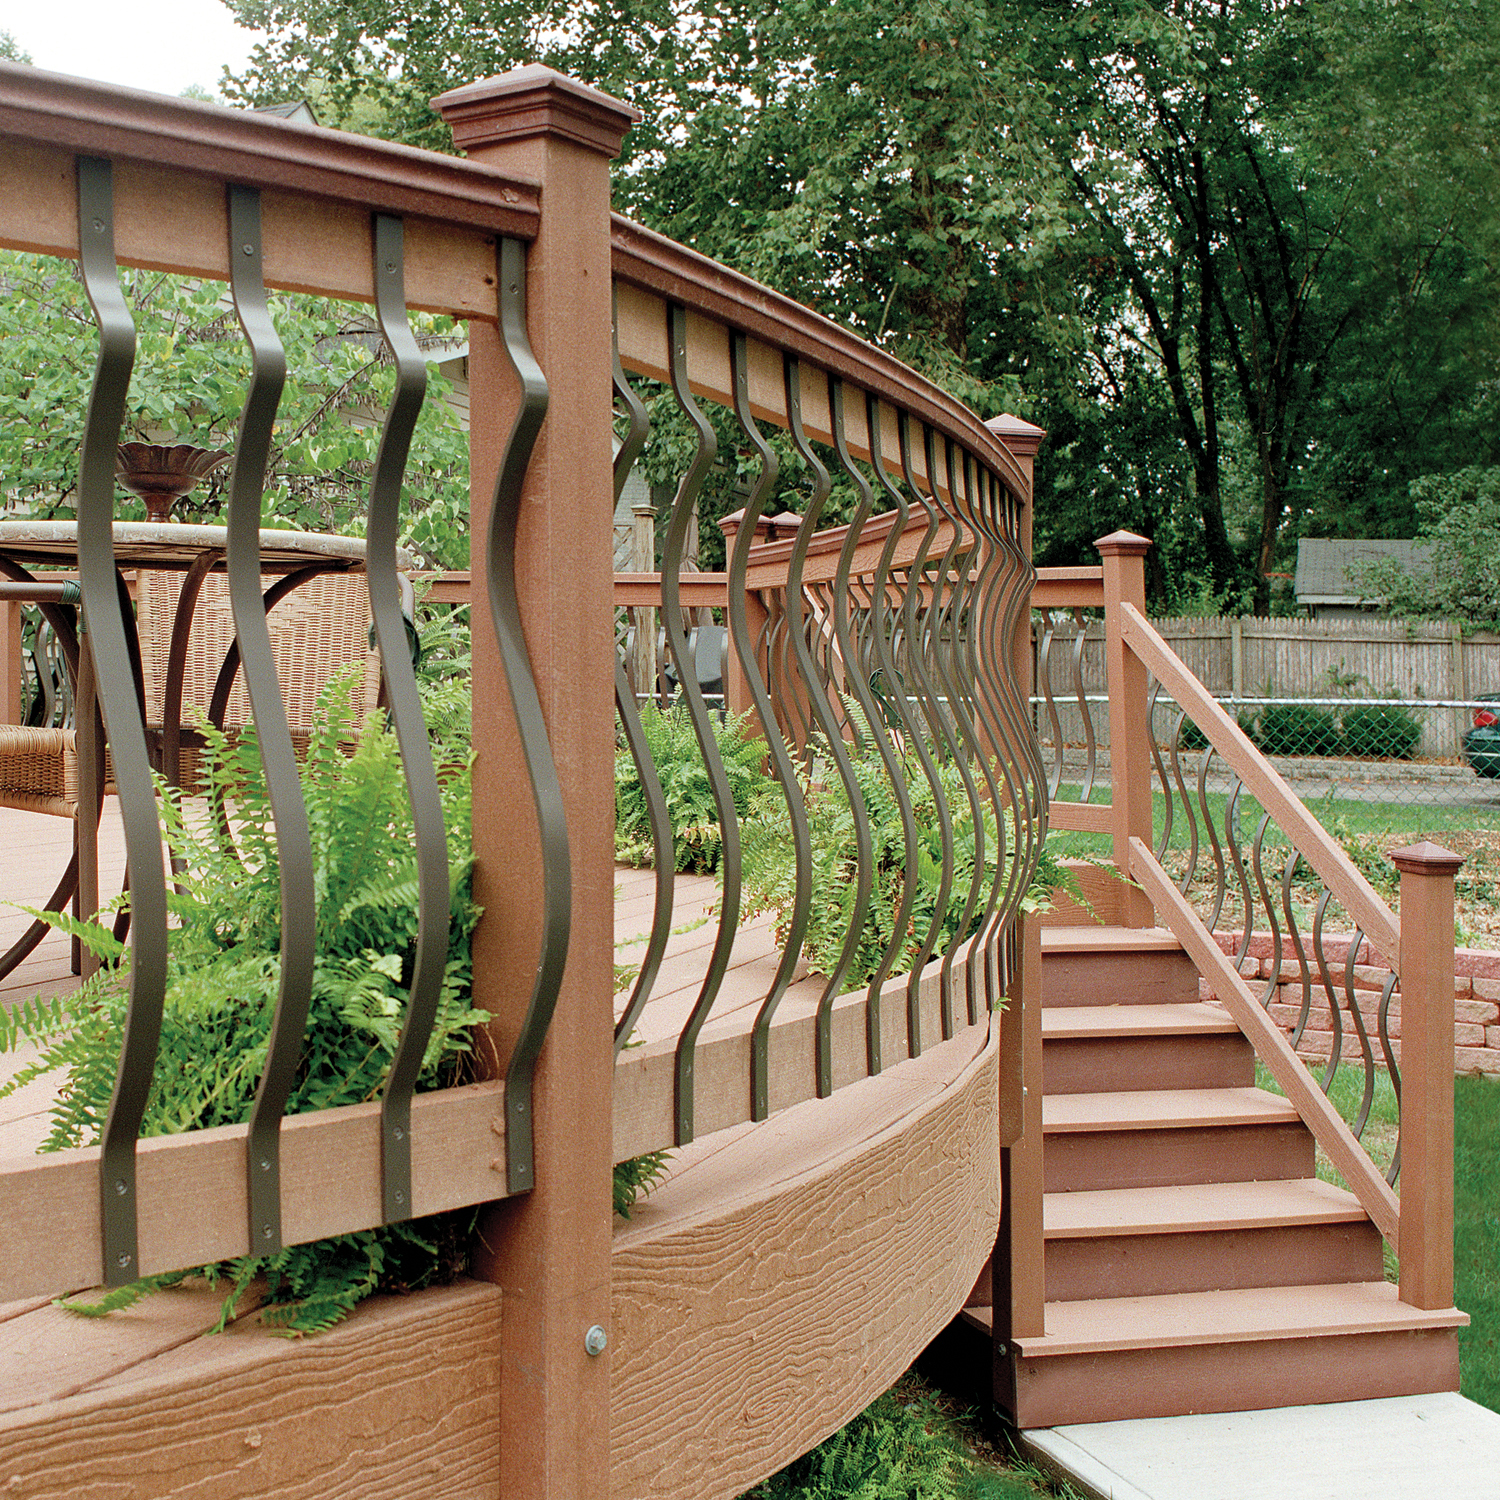 How To Install Westgate Metal Deck Railing / How To Easily Build and Install Dec